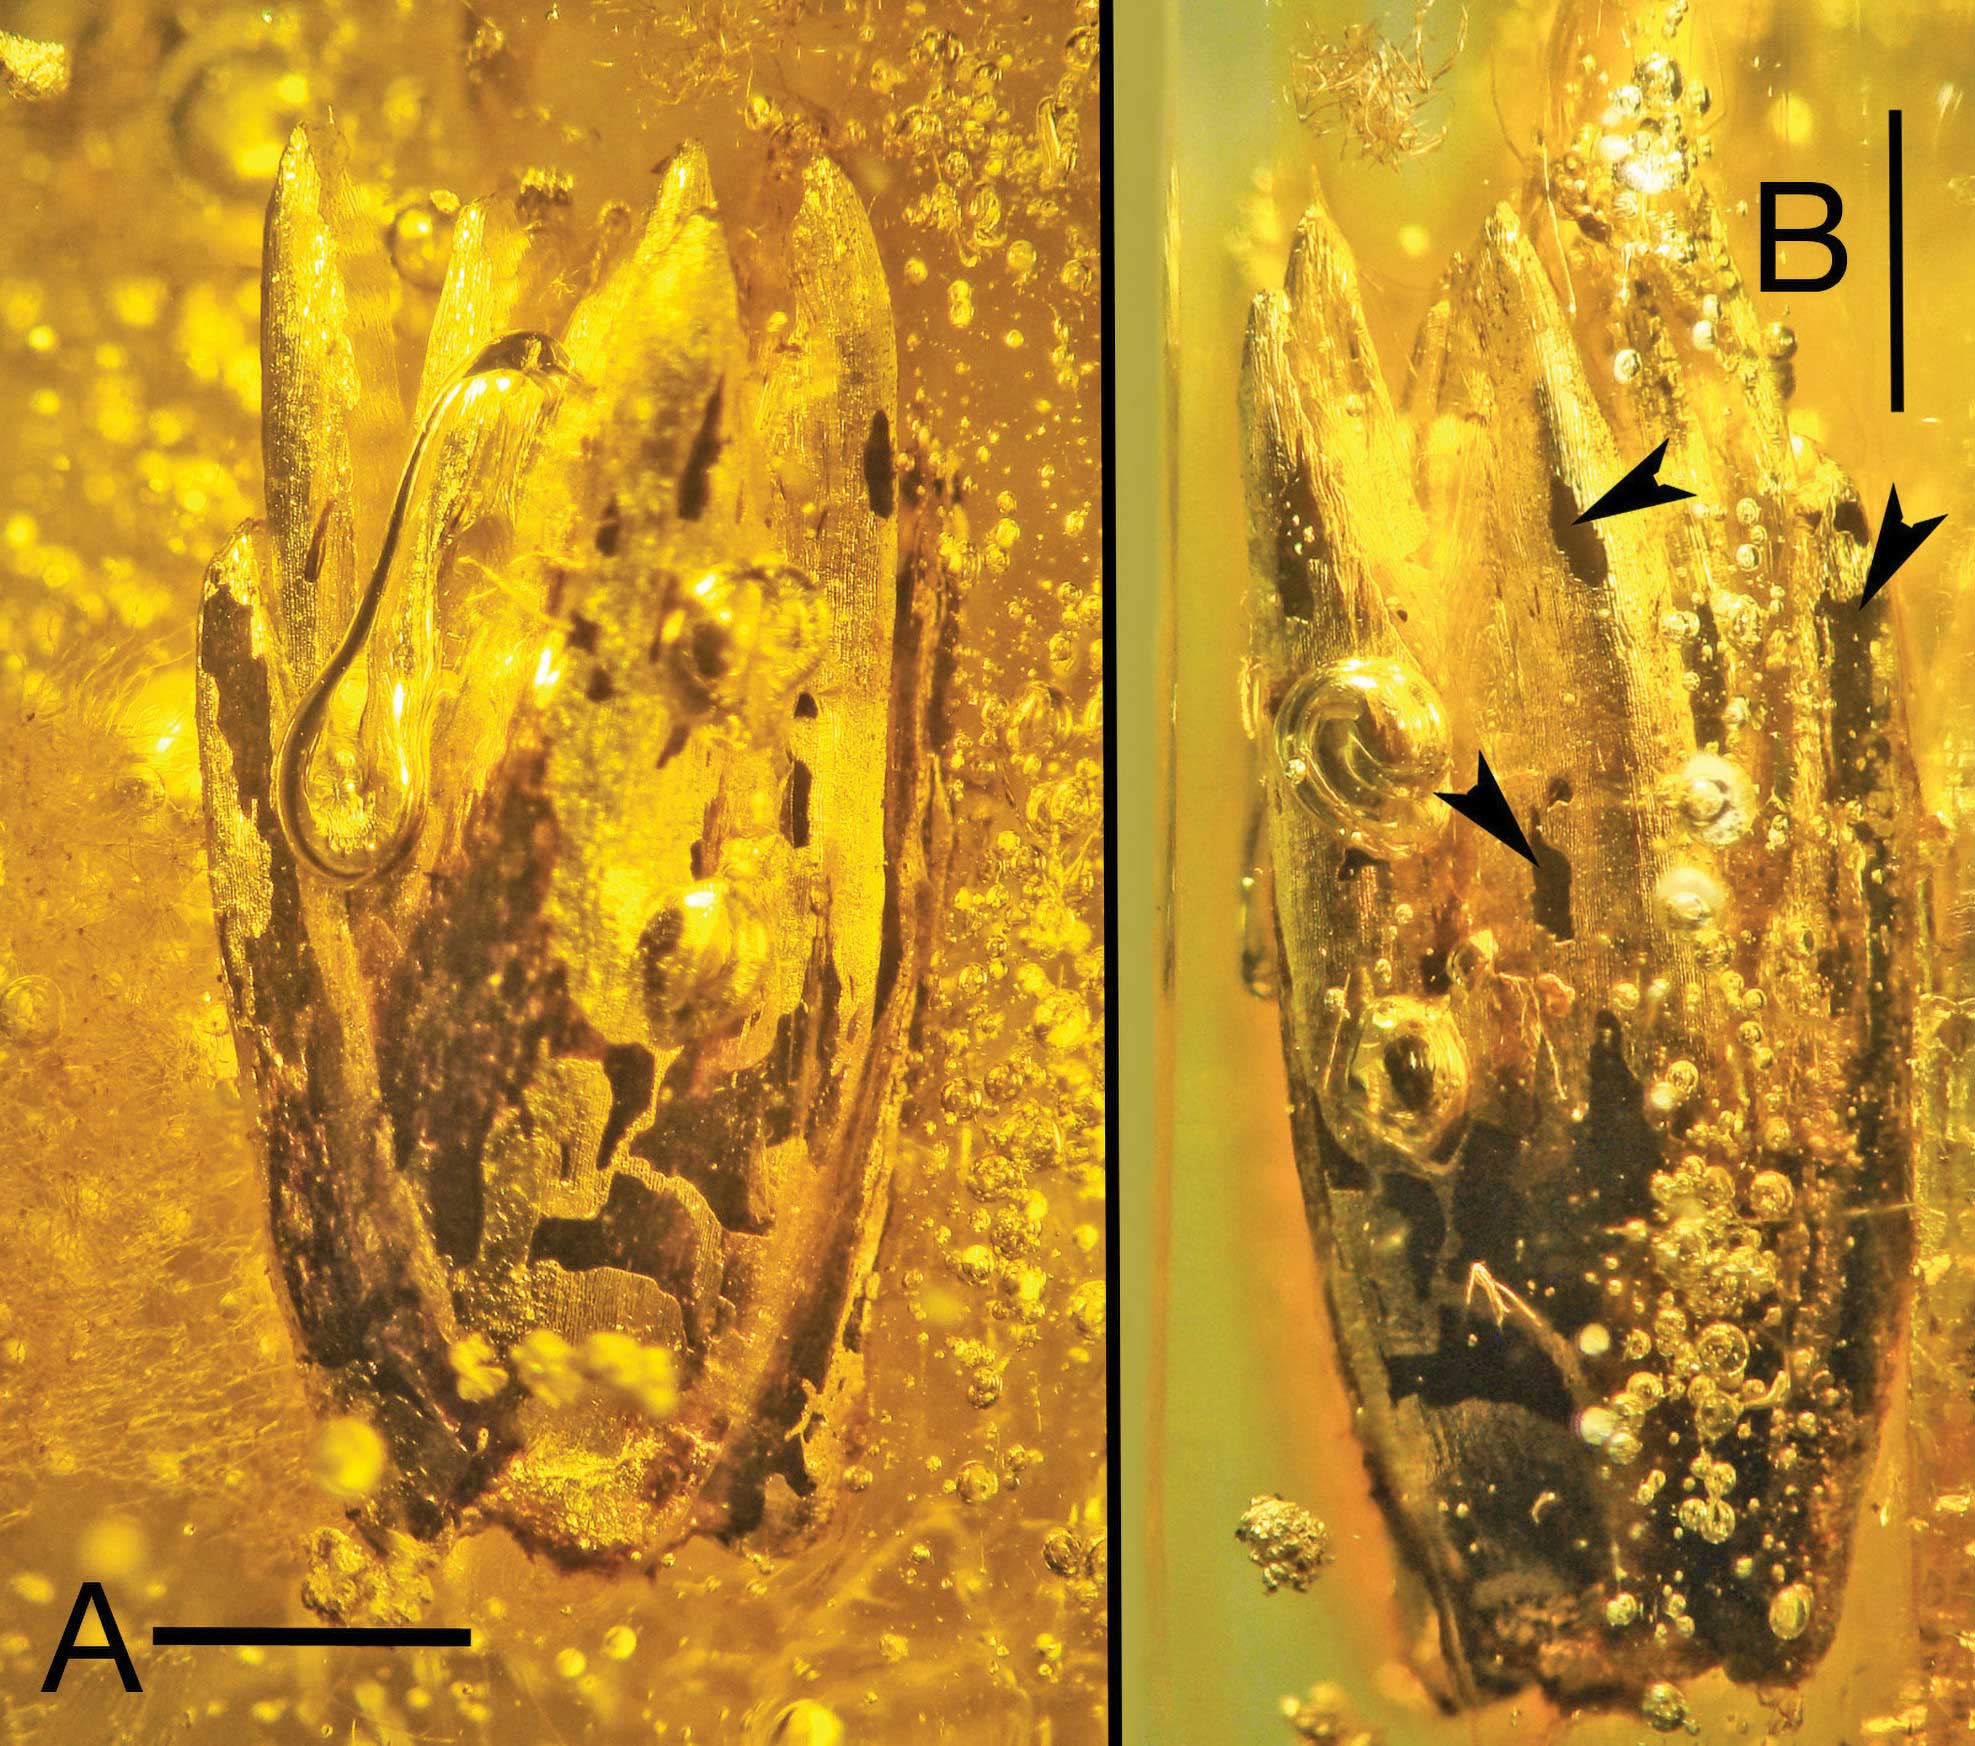 2-panel figure of photos shows a spikelet of the Eocene grass Eograminis balticus preserved in amber in two views. The view of the right has arrowheads showing insect damage.